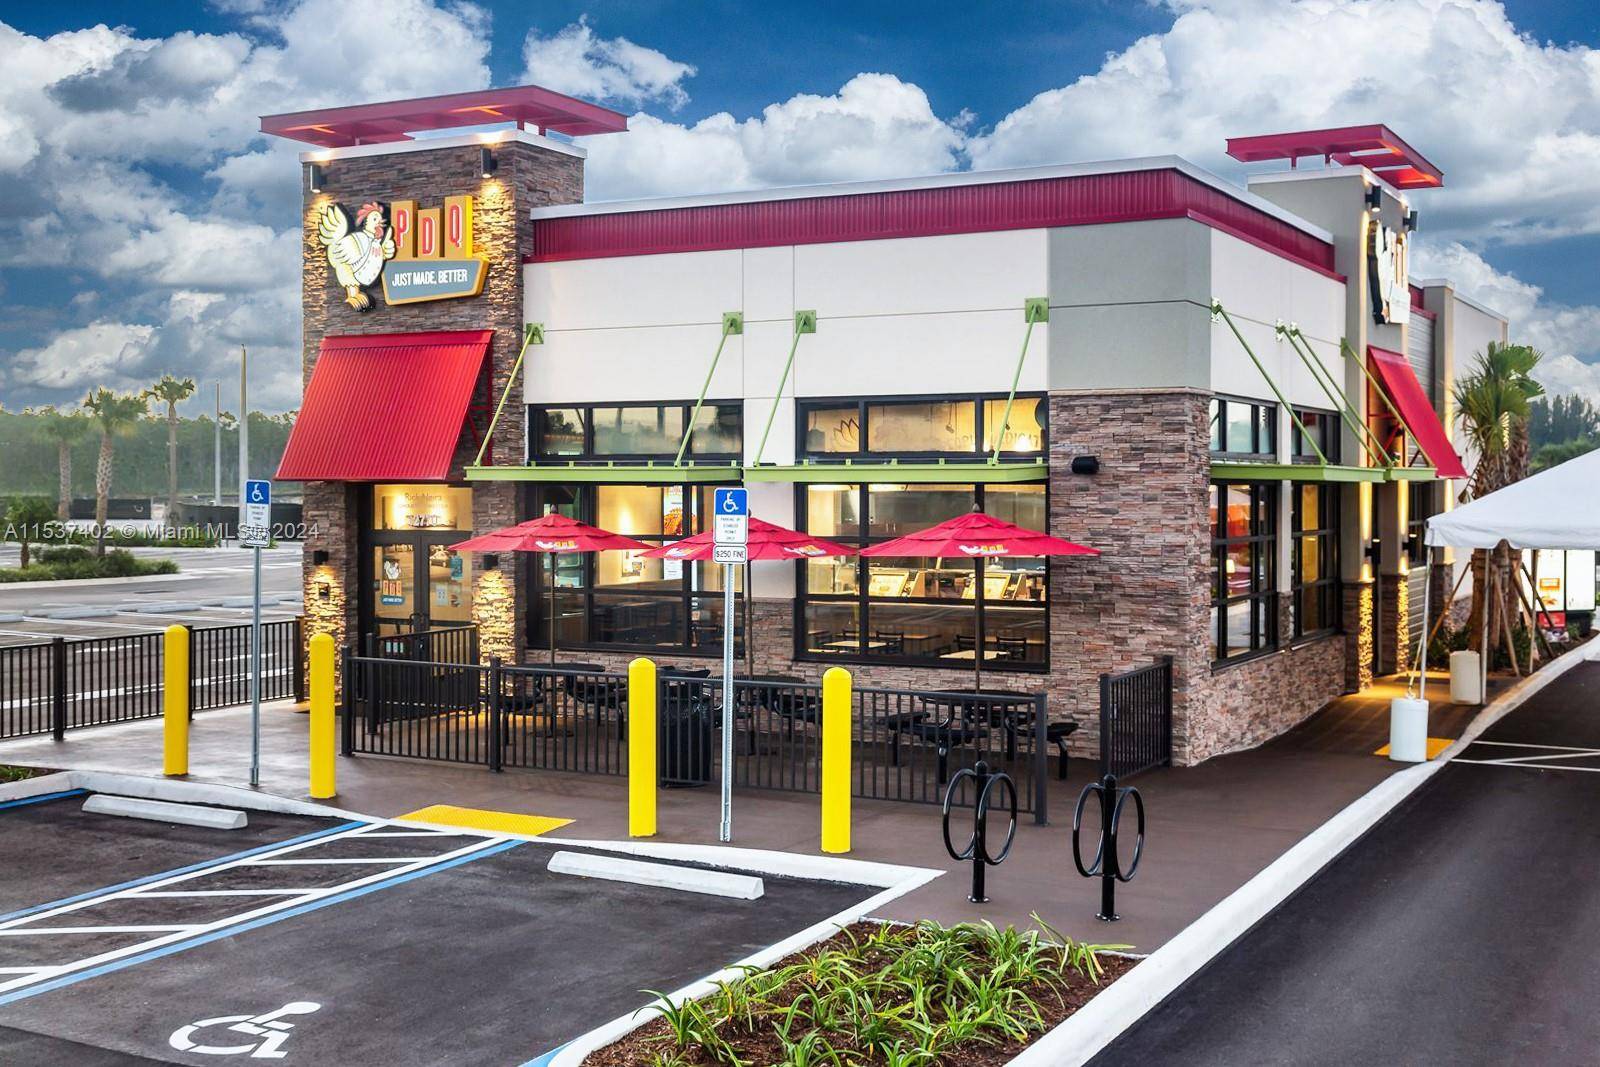 BRAND NEW 15 YEAR LEASE OPTIONS TO EXTEND 2023 CONSTRUCTION SCHEDULED RENT INCREASES CORPORATELY GUARANTEED PDQ recently executed a brand new 15 year lease with 5 5 year Options to ...